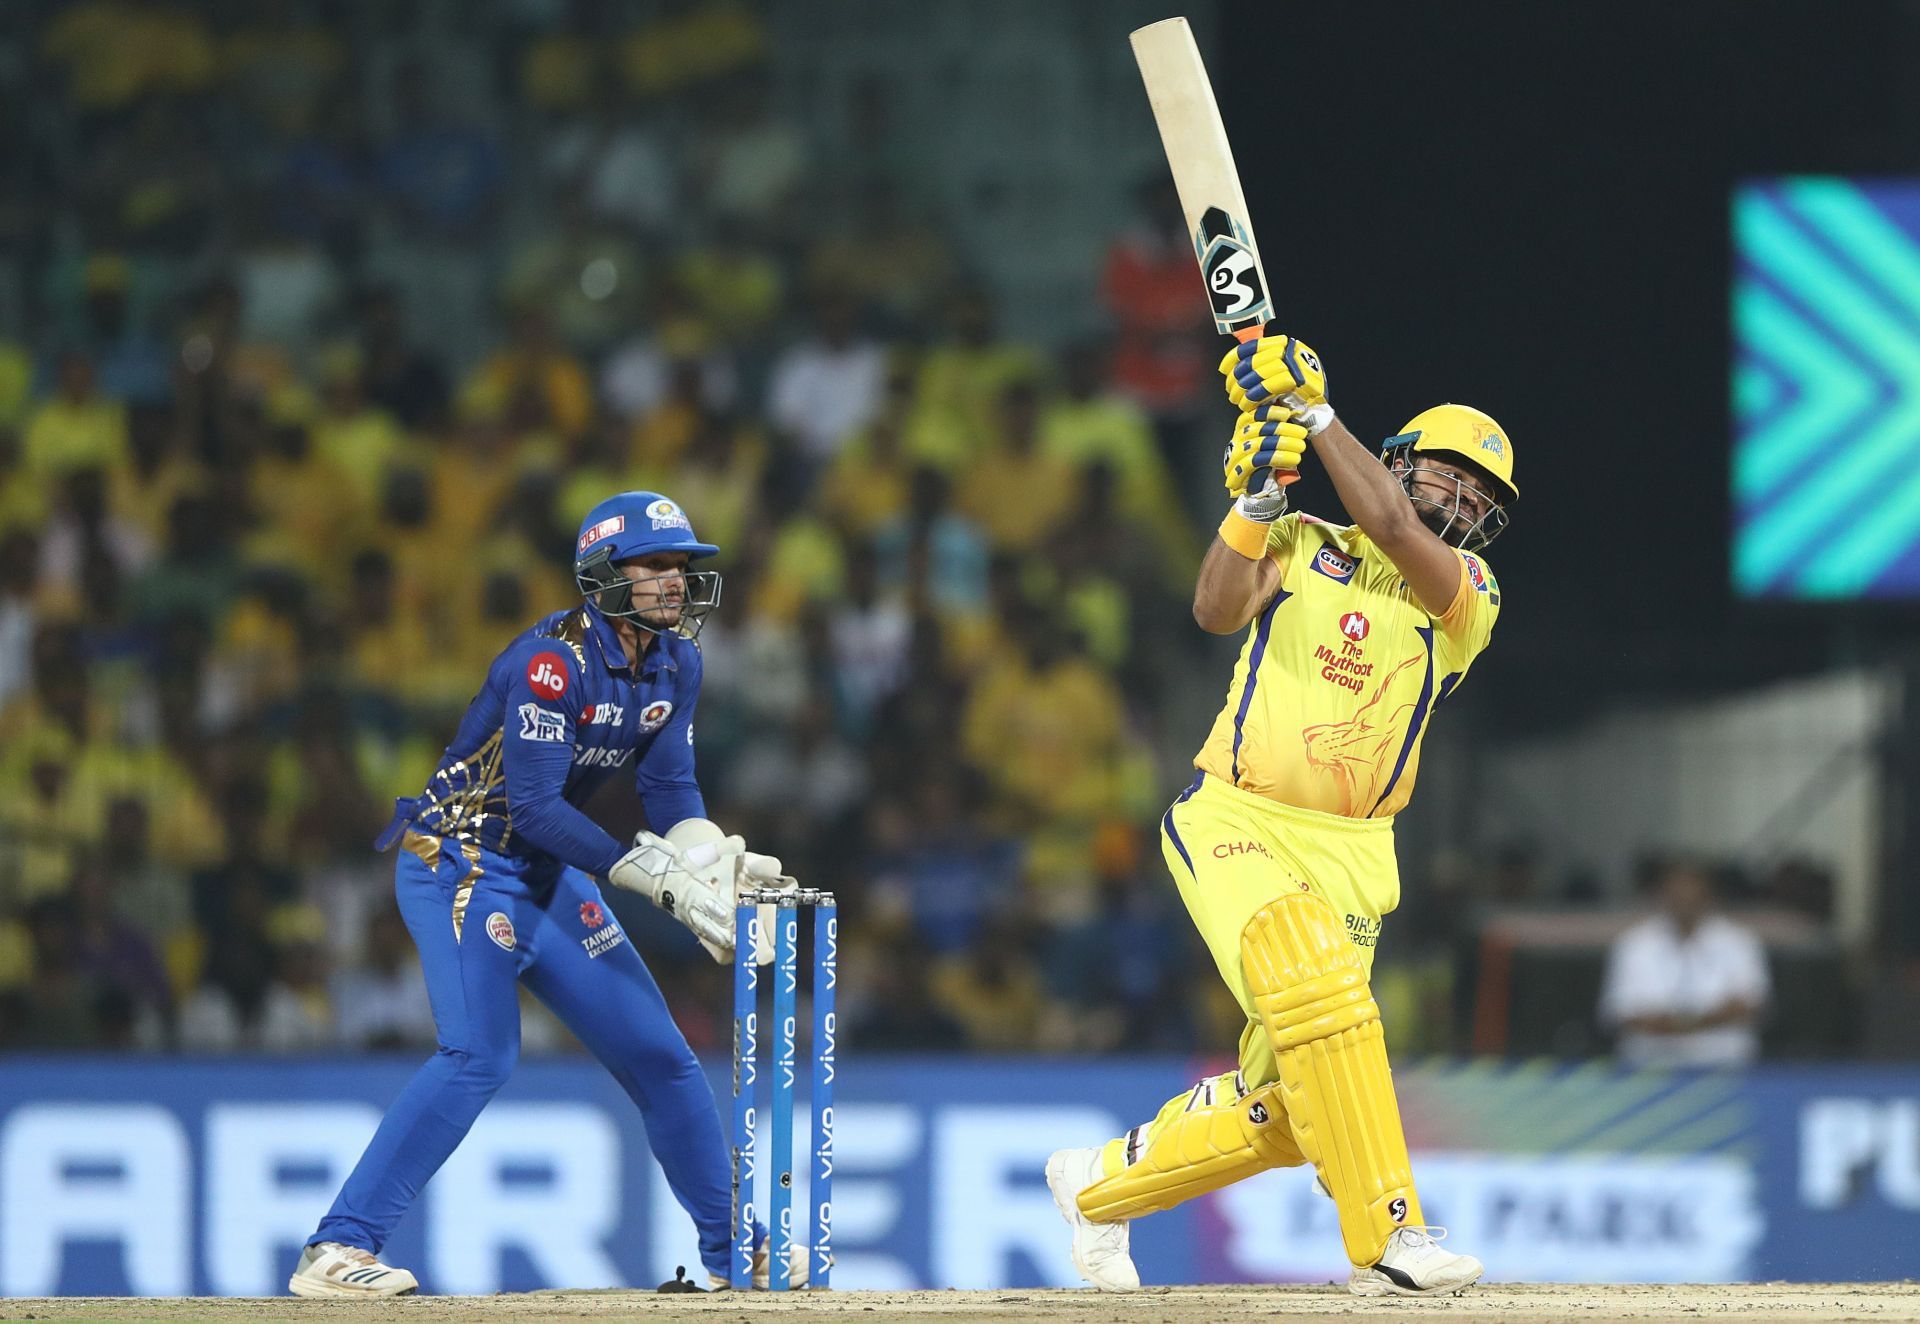 Suresh Raina was not in the CSK playing XI for the 2021 IPL final